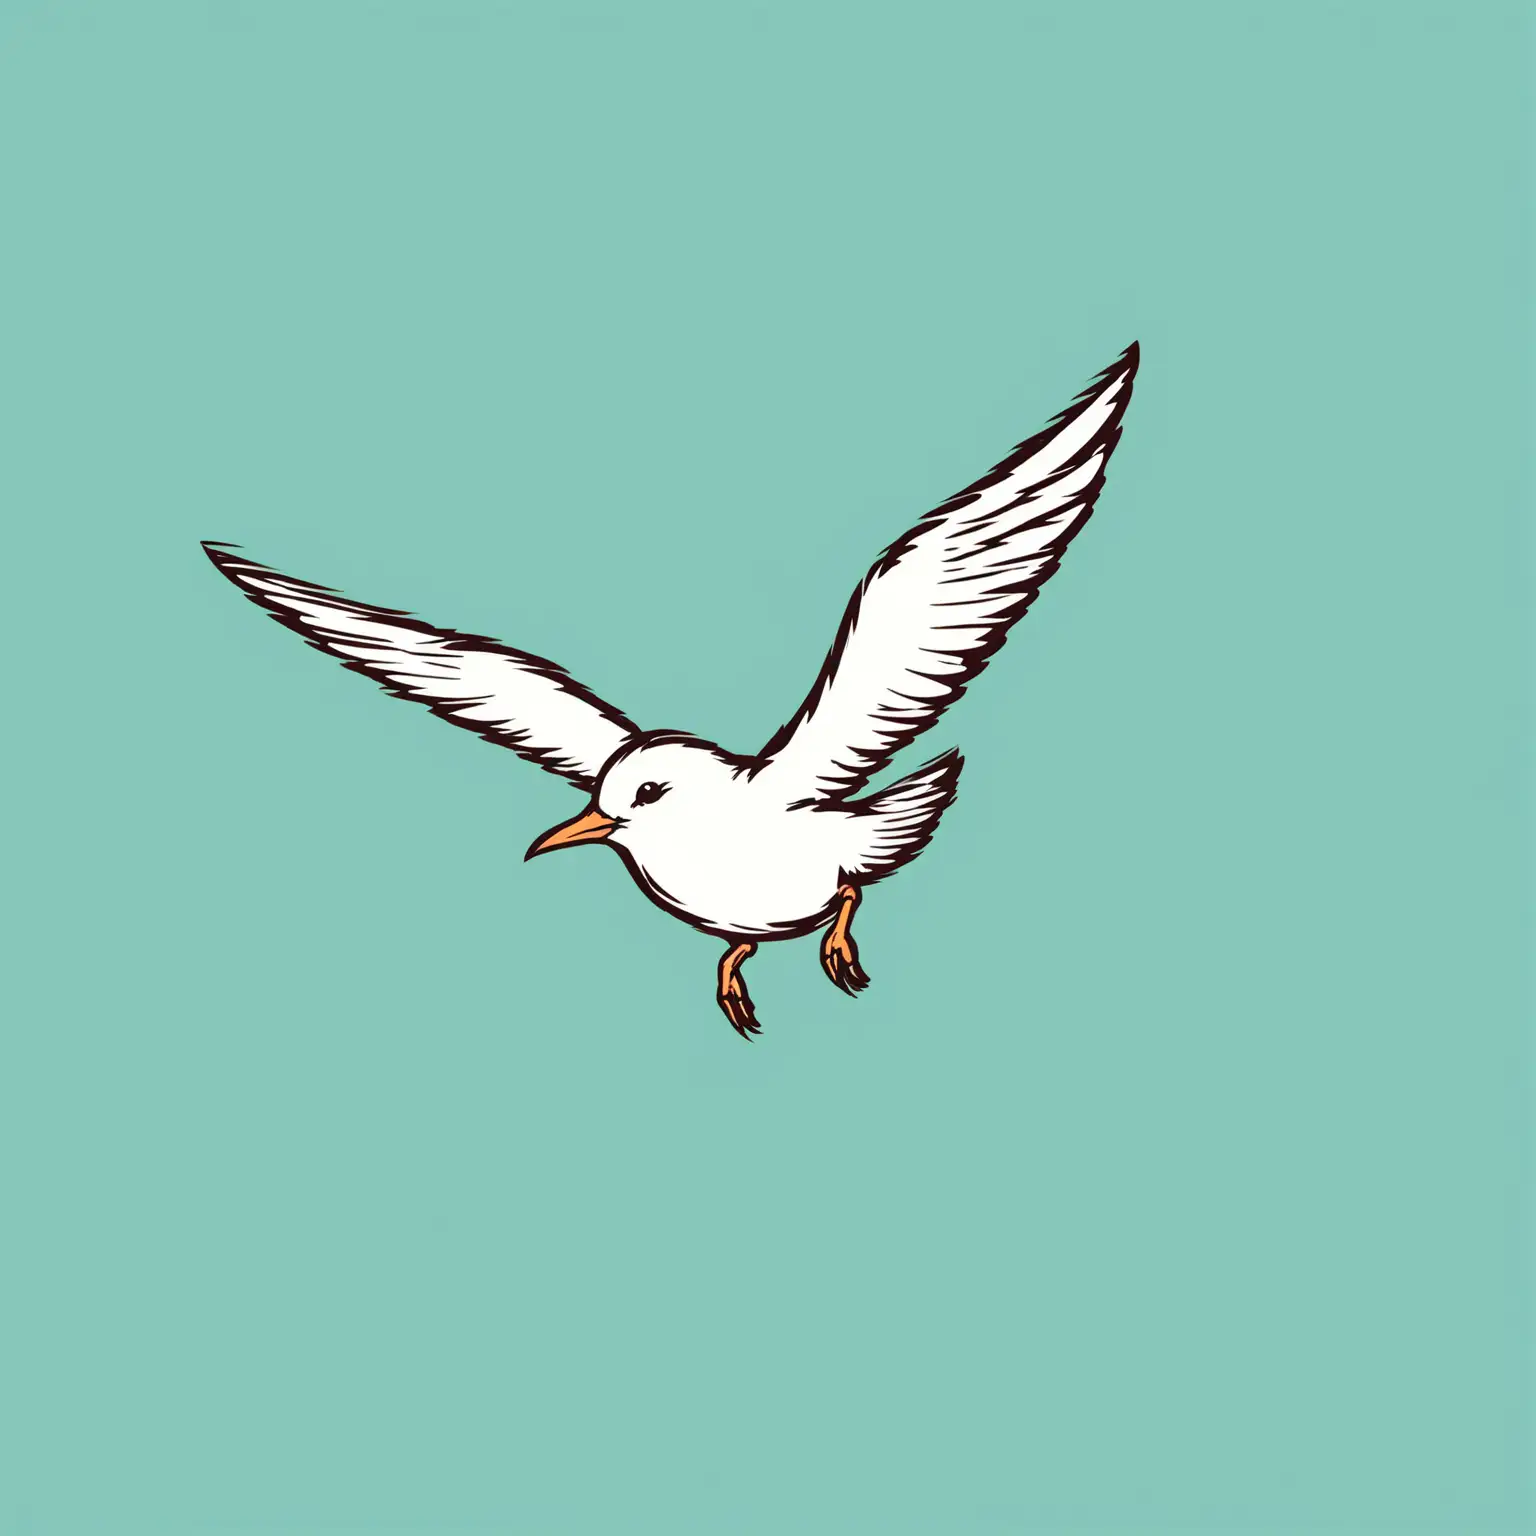 simple flying bird graphic